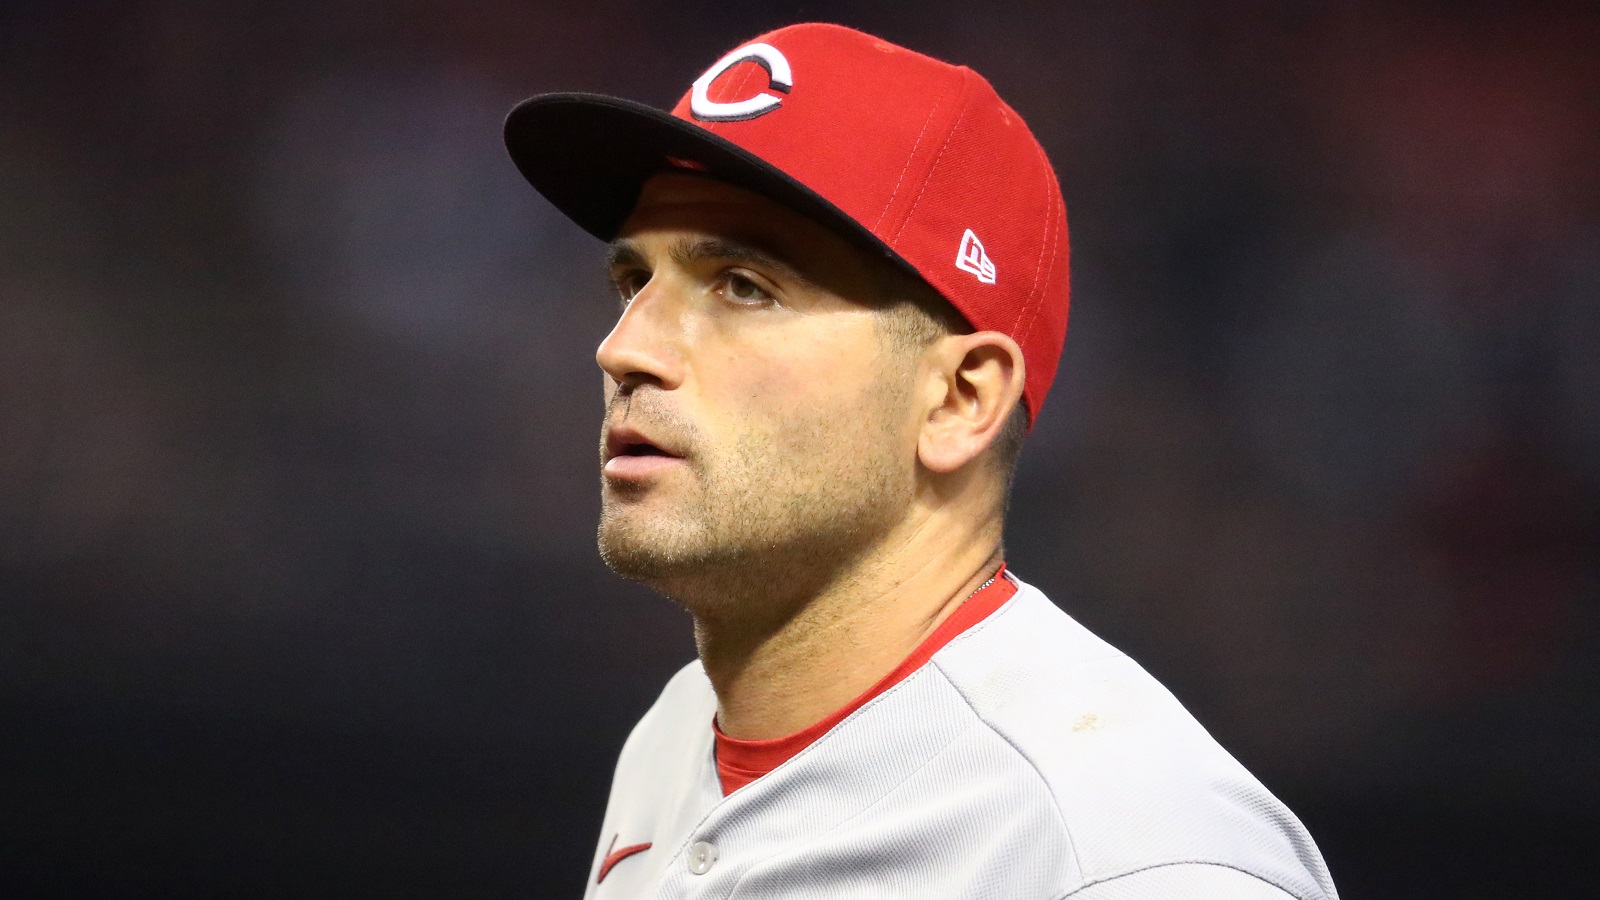 Joey Votto becomes an American citizen